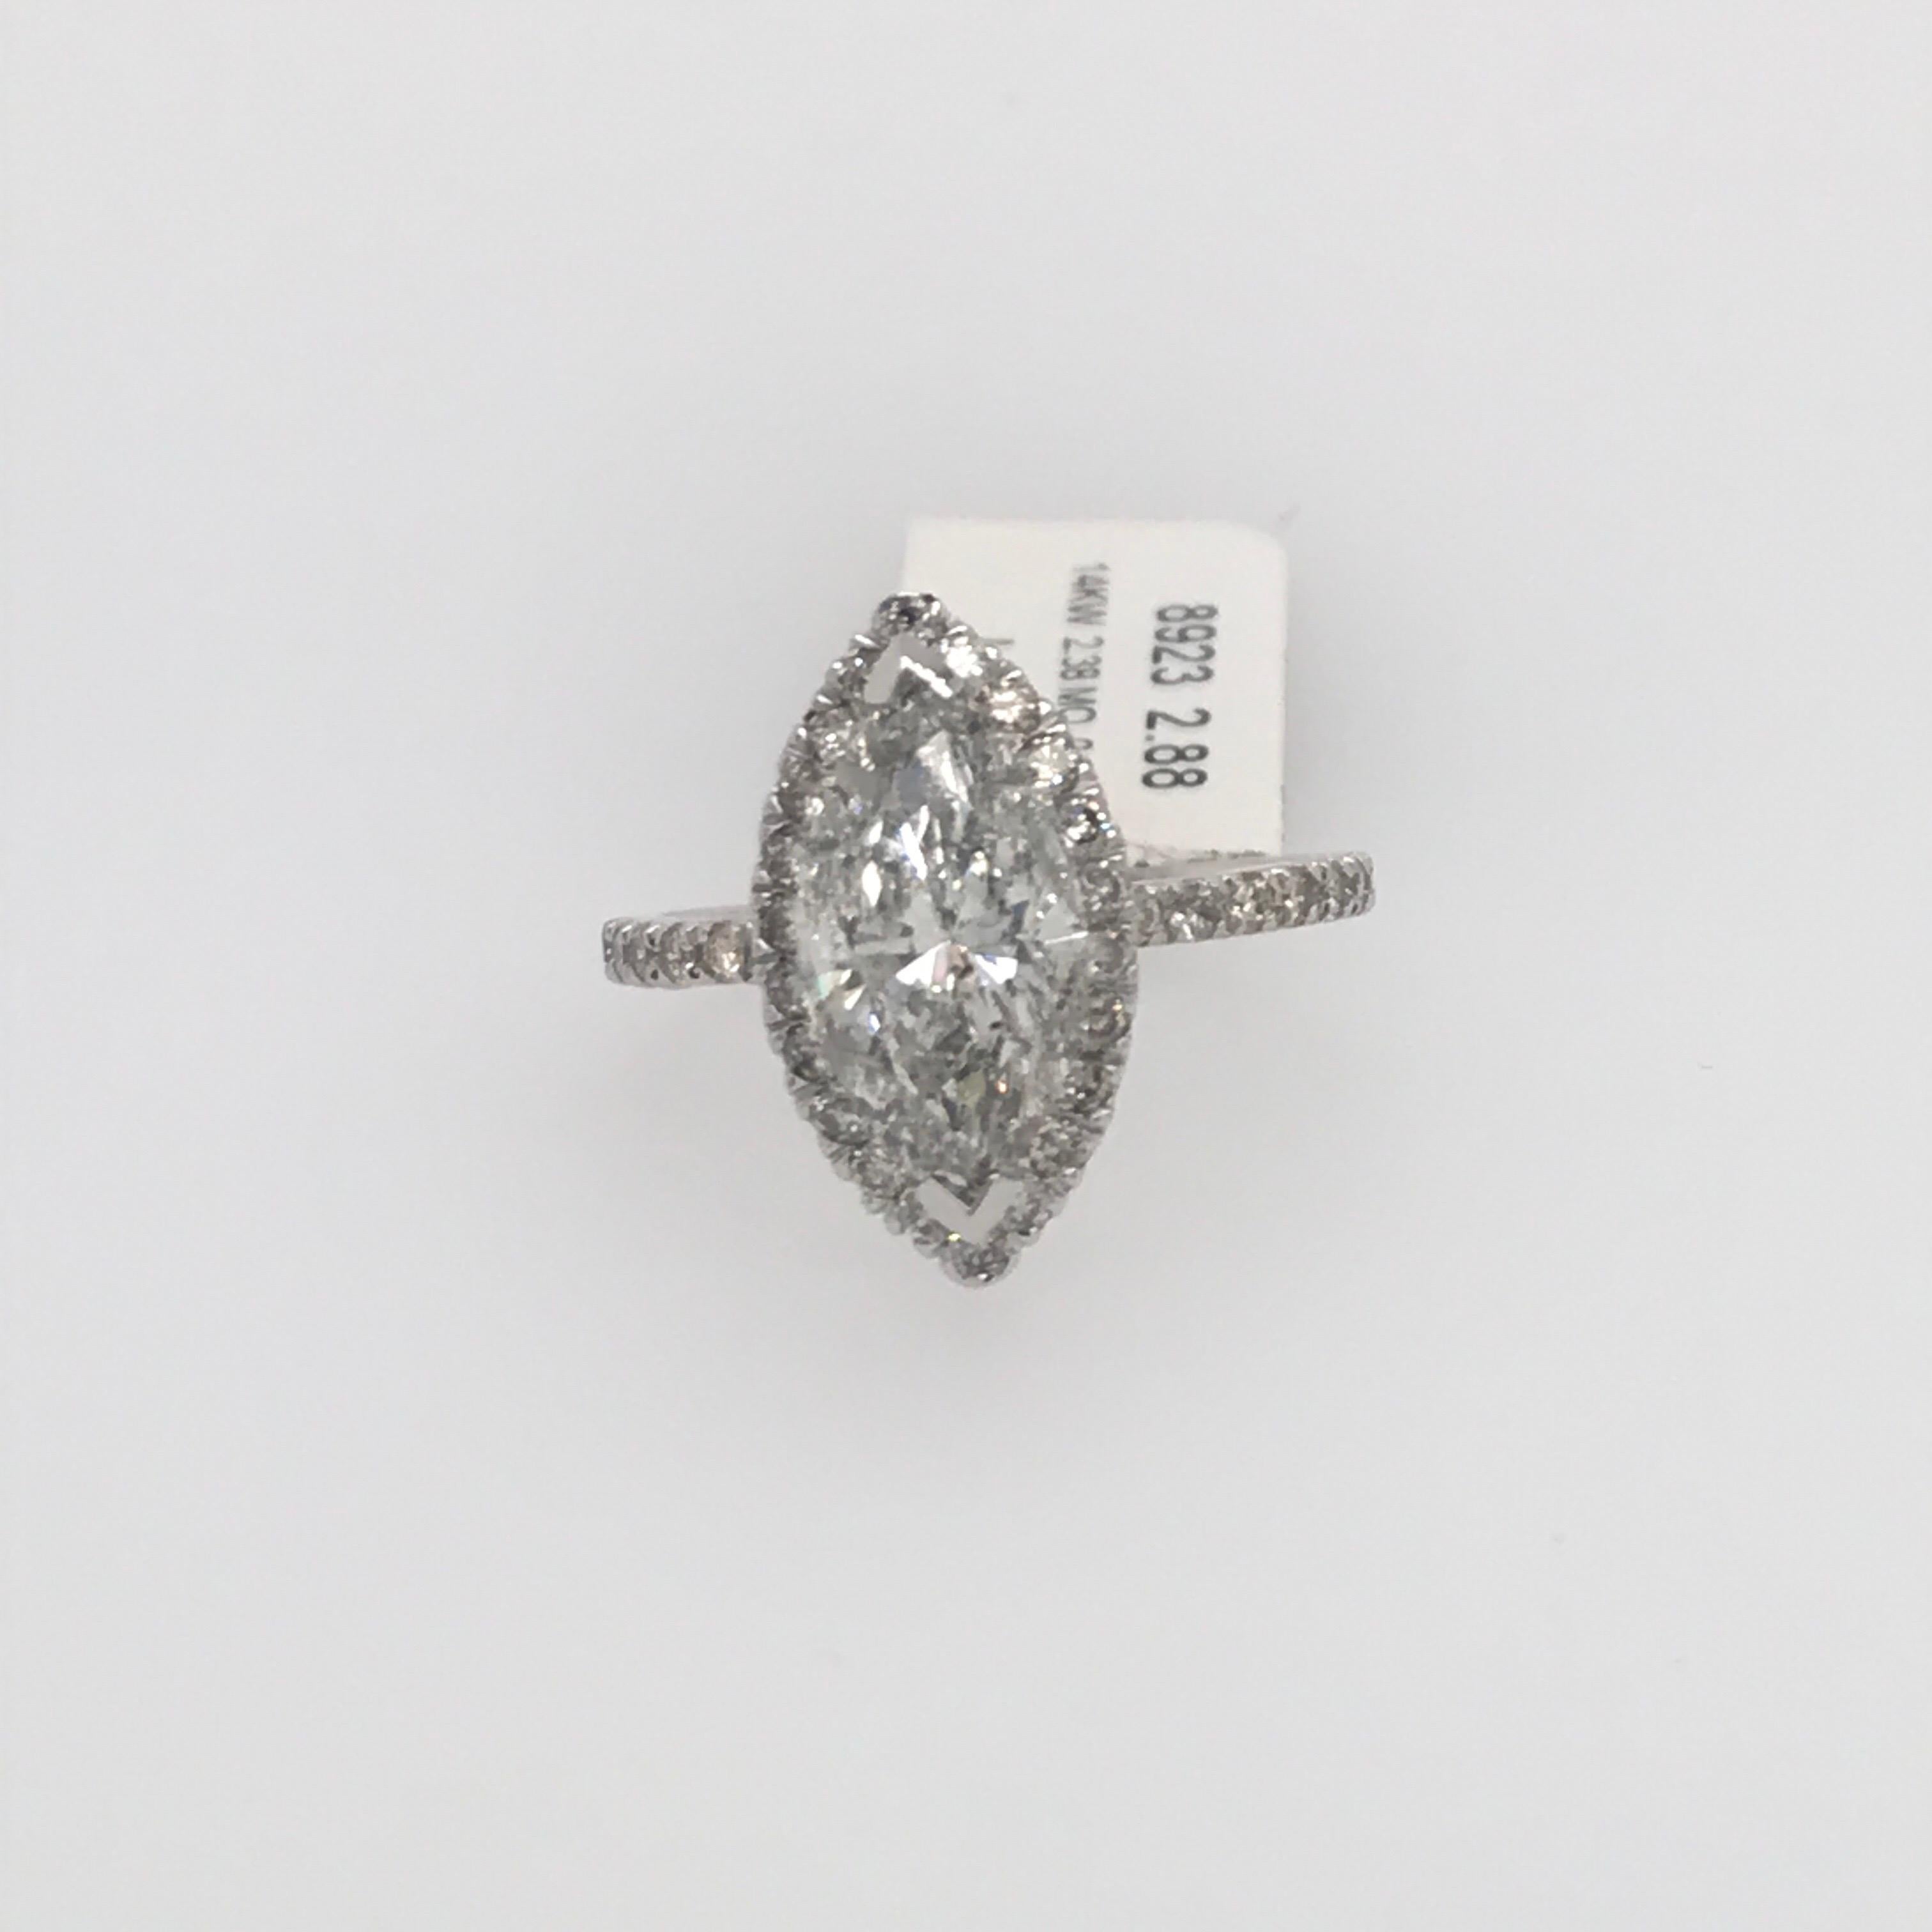 14K White Gold engagement ring featuring one marquise cut diamond weighing 2.38 carats flanked with a diamond halo weighing 0.50 carats. 
Color J-K
Clarity I1-I2